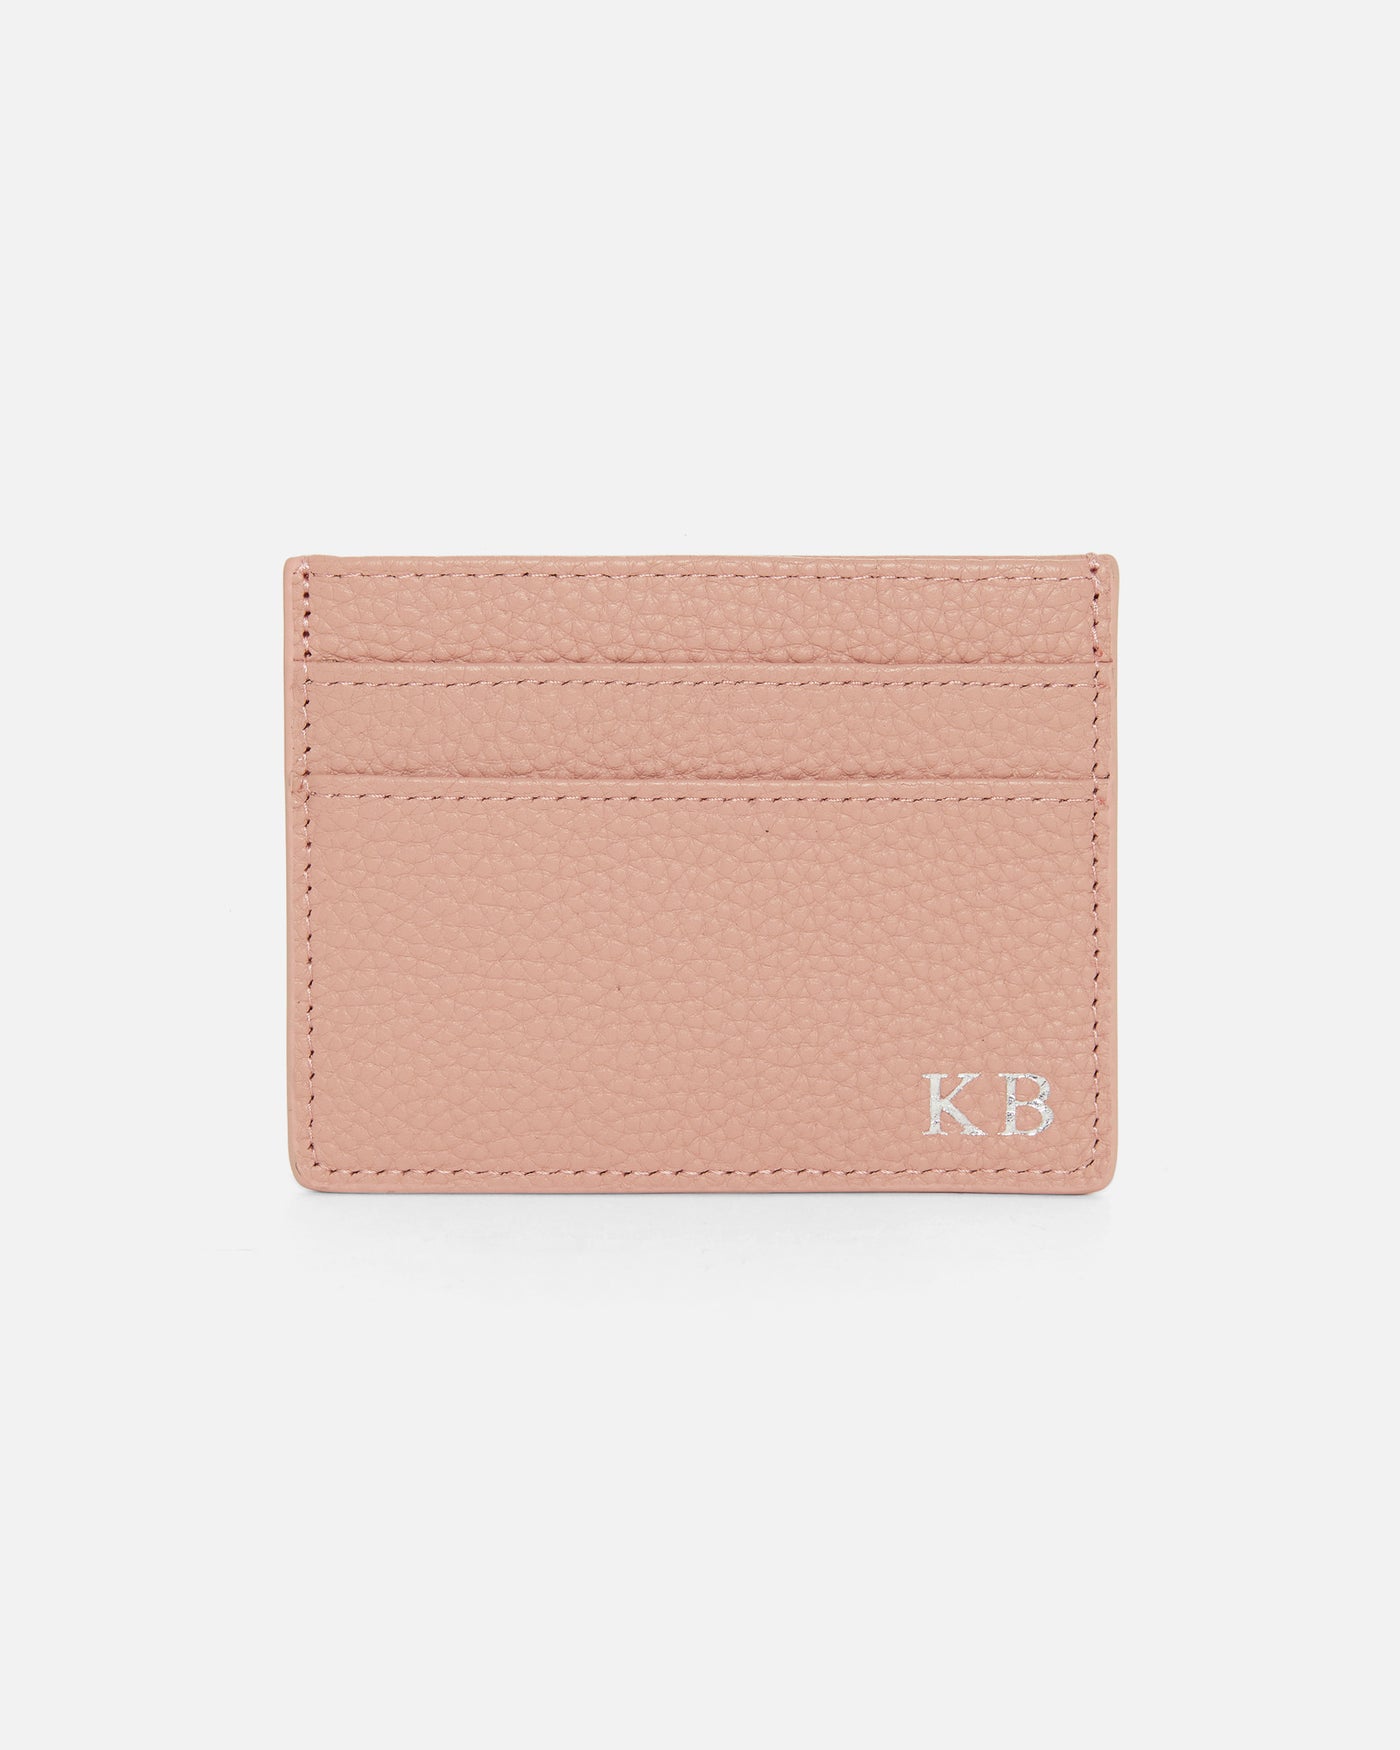 nude pebble leather card holder embossed with initials